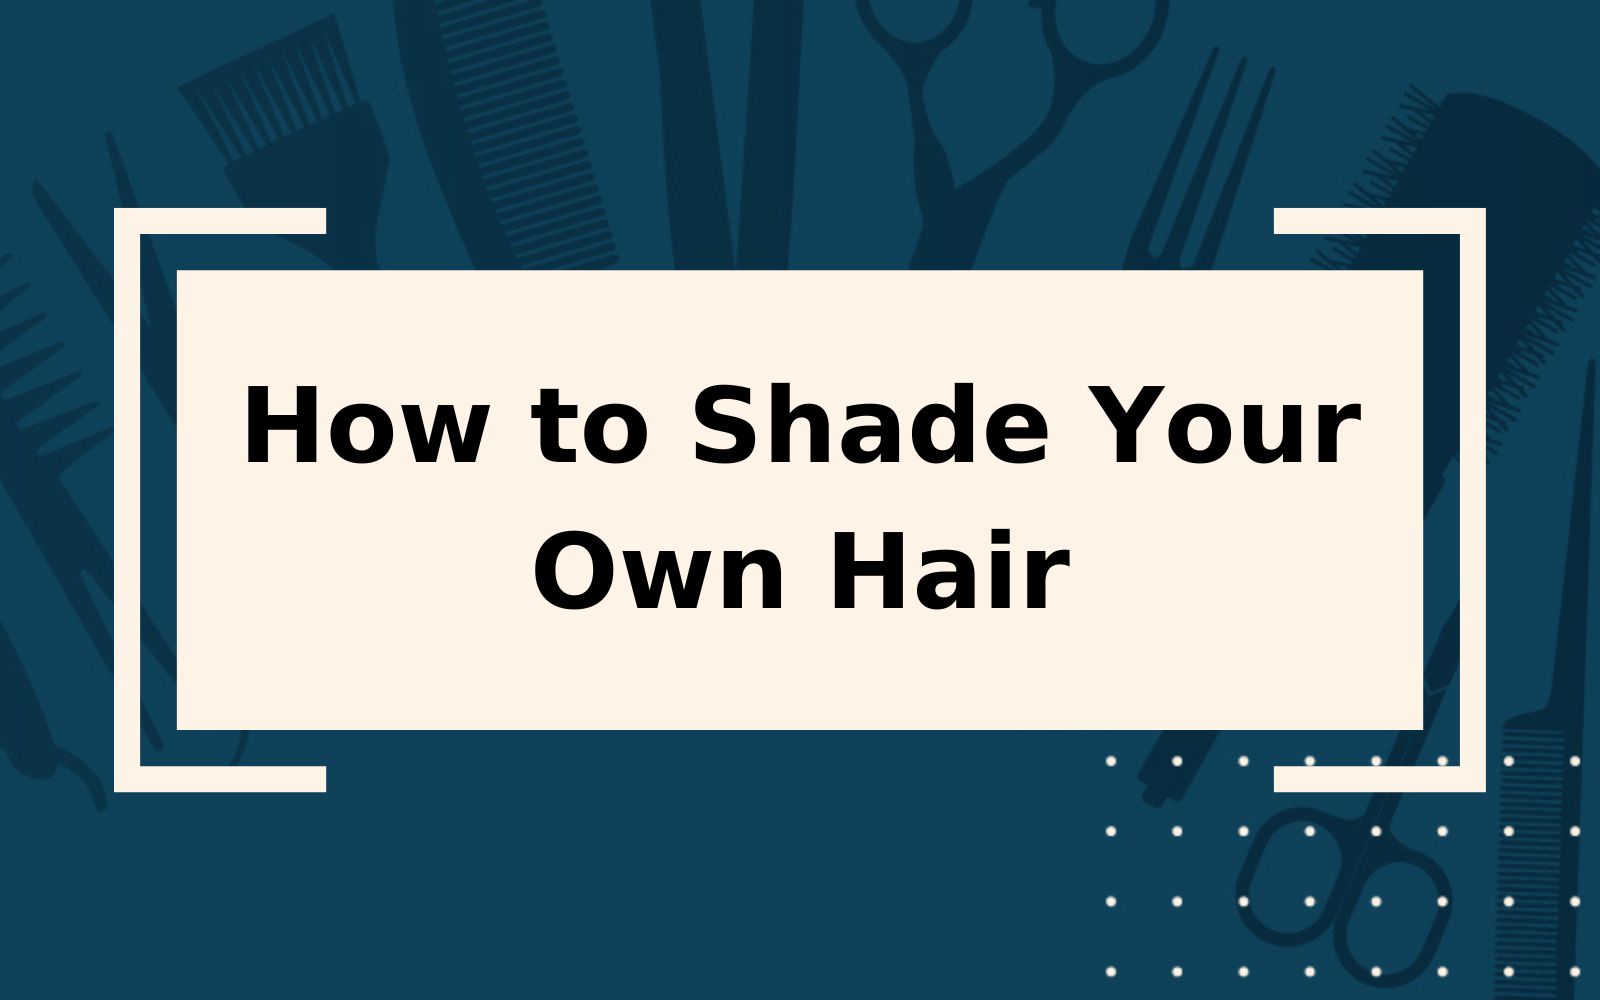 How to Shade Hair | Step-by-Step Guide